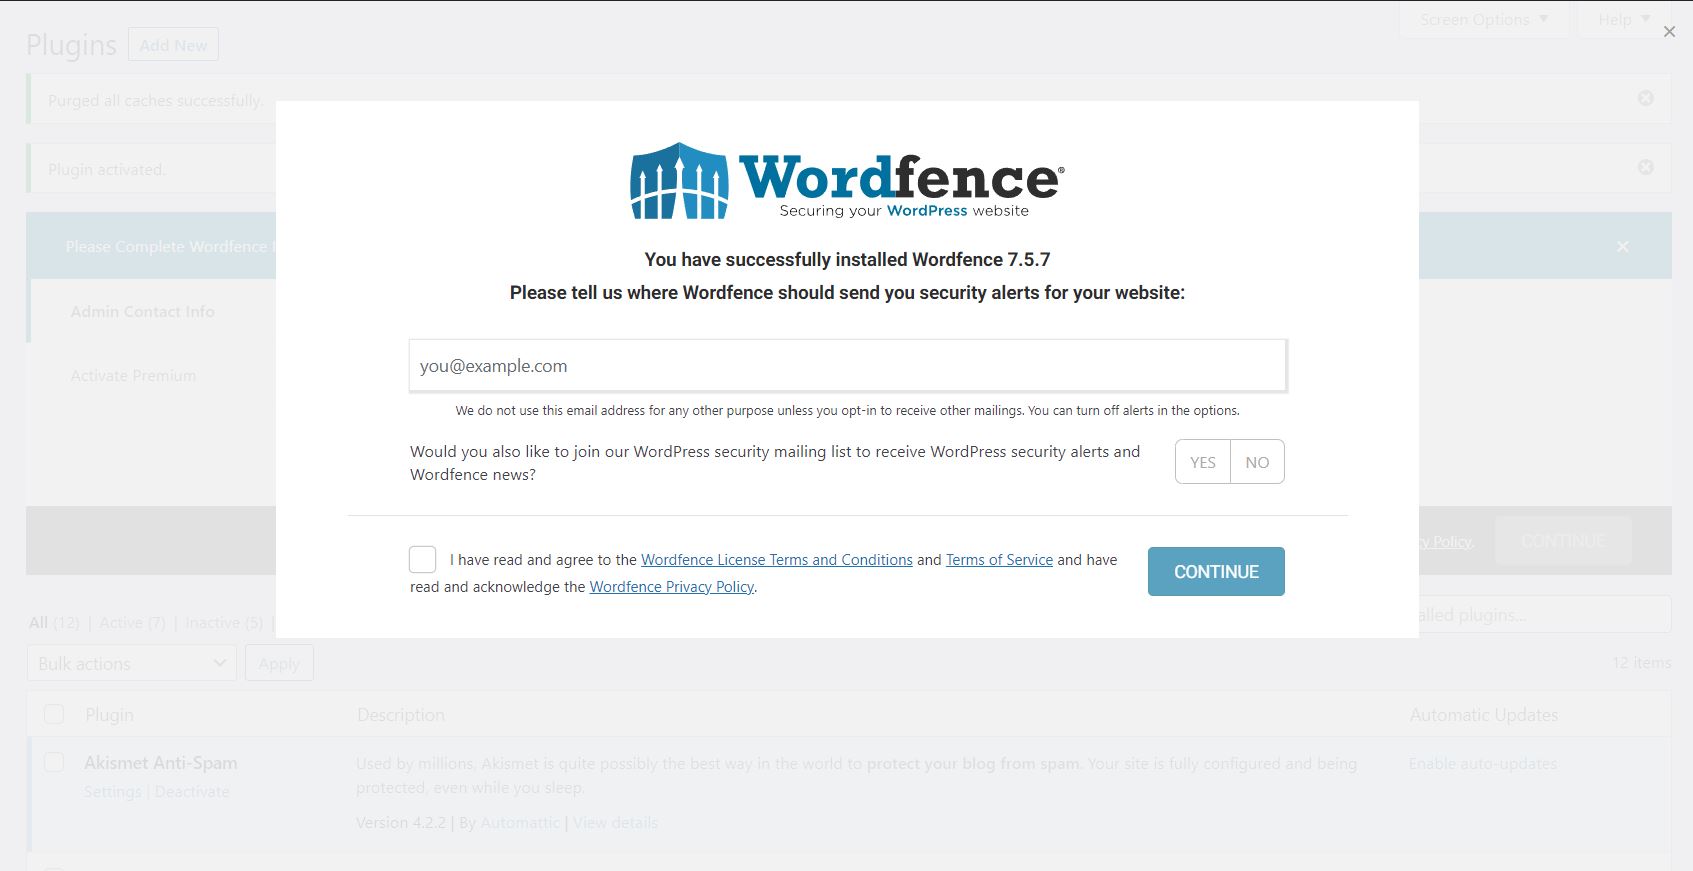 How To Install Wordfence Guide Welcome Screen - Add email